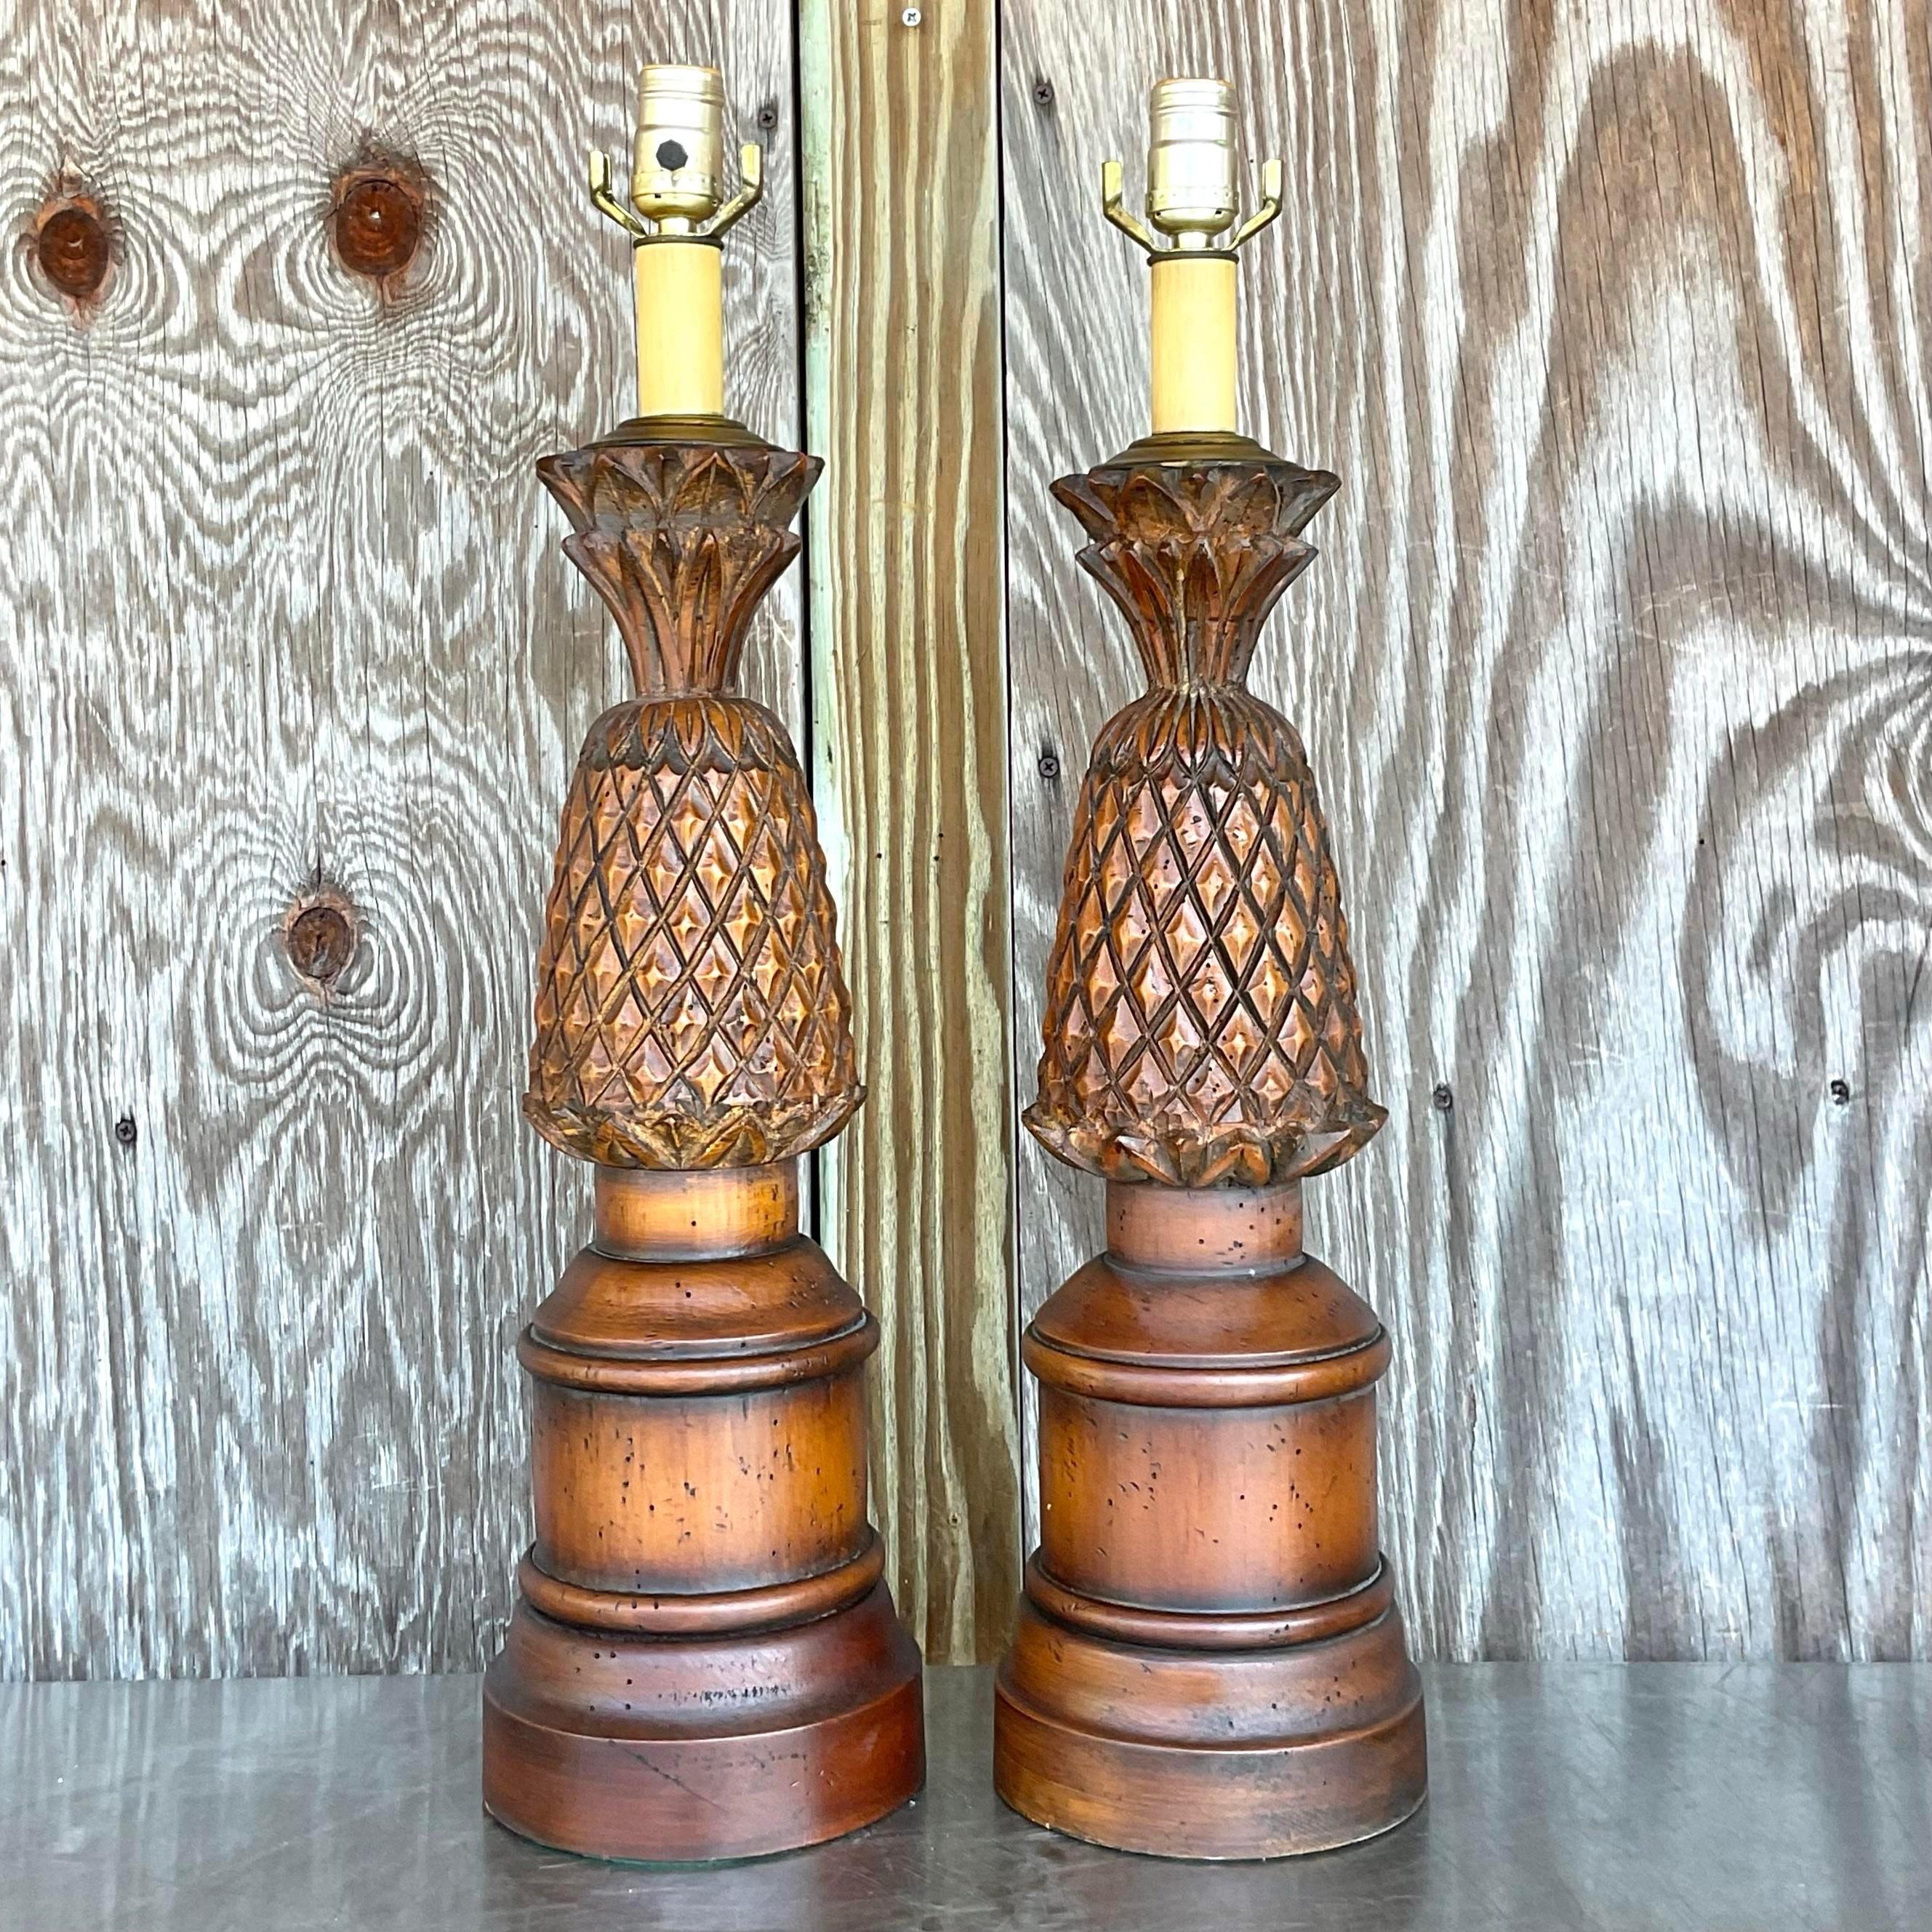 Add a touch of bohemian charm to your space with this delightful pair of Vintage Boho Hand Carved Pineapple Lamps. Crafted with intricate detailing and warm, natural wood, these lamps embody the whimsical spirit of American boho style, bringing a